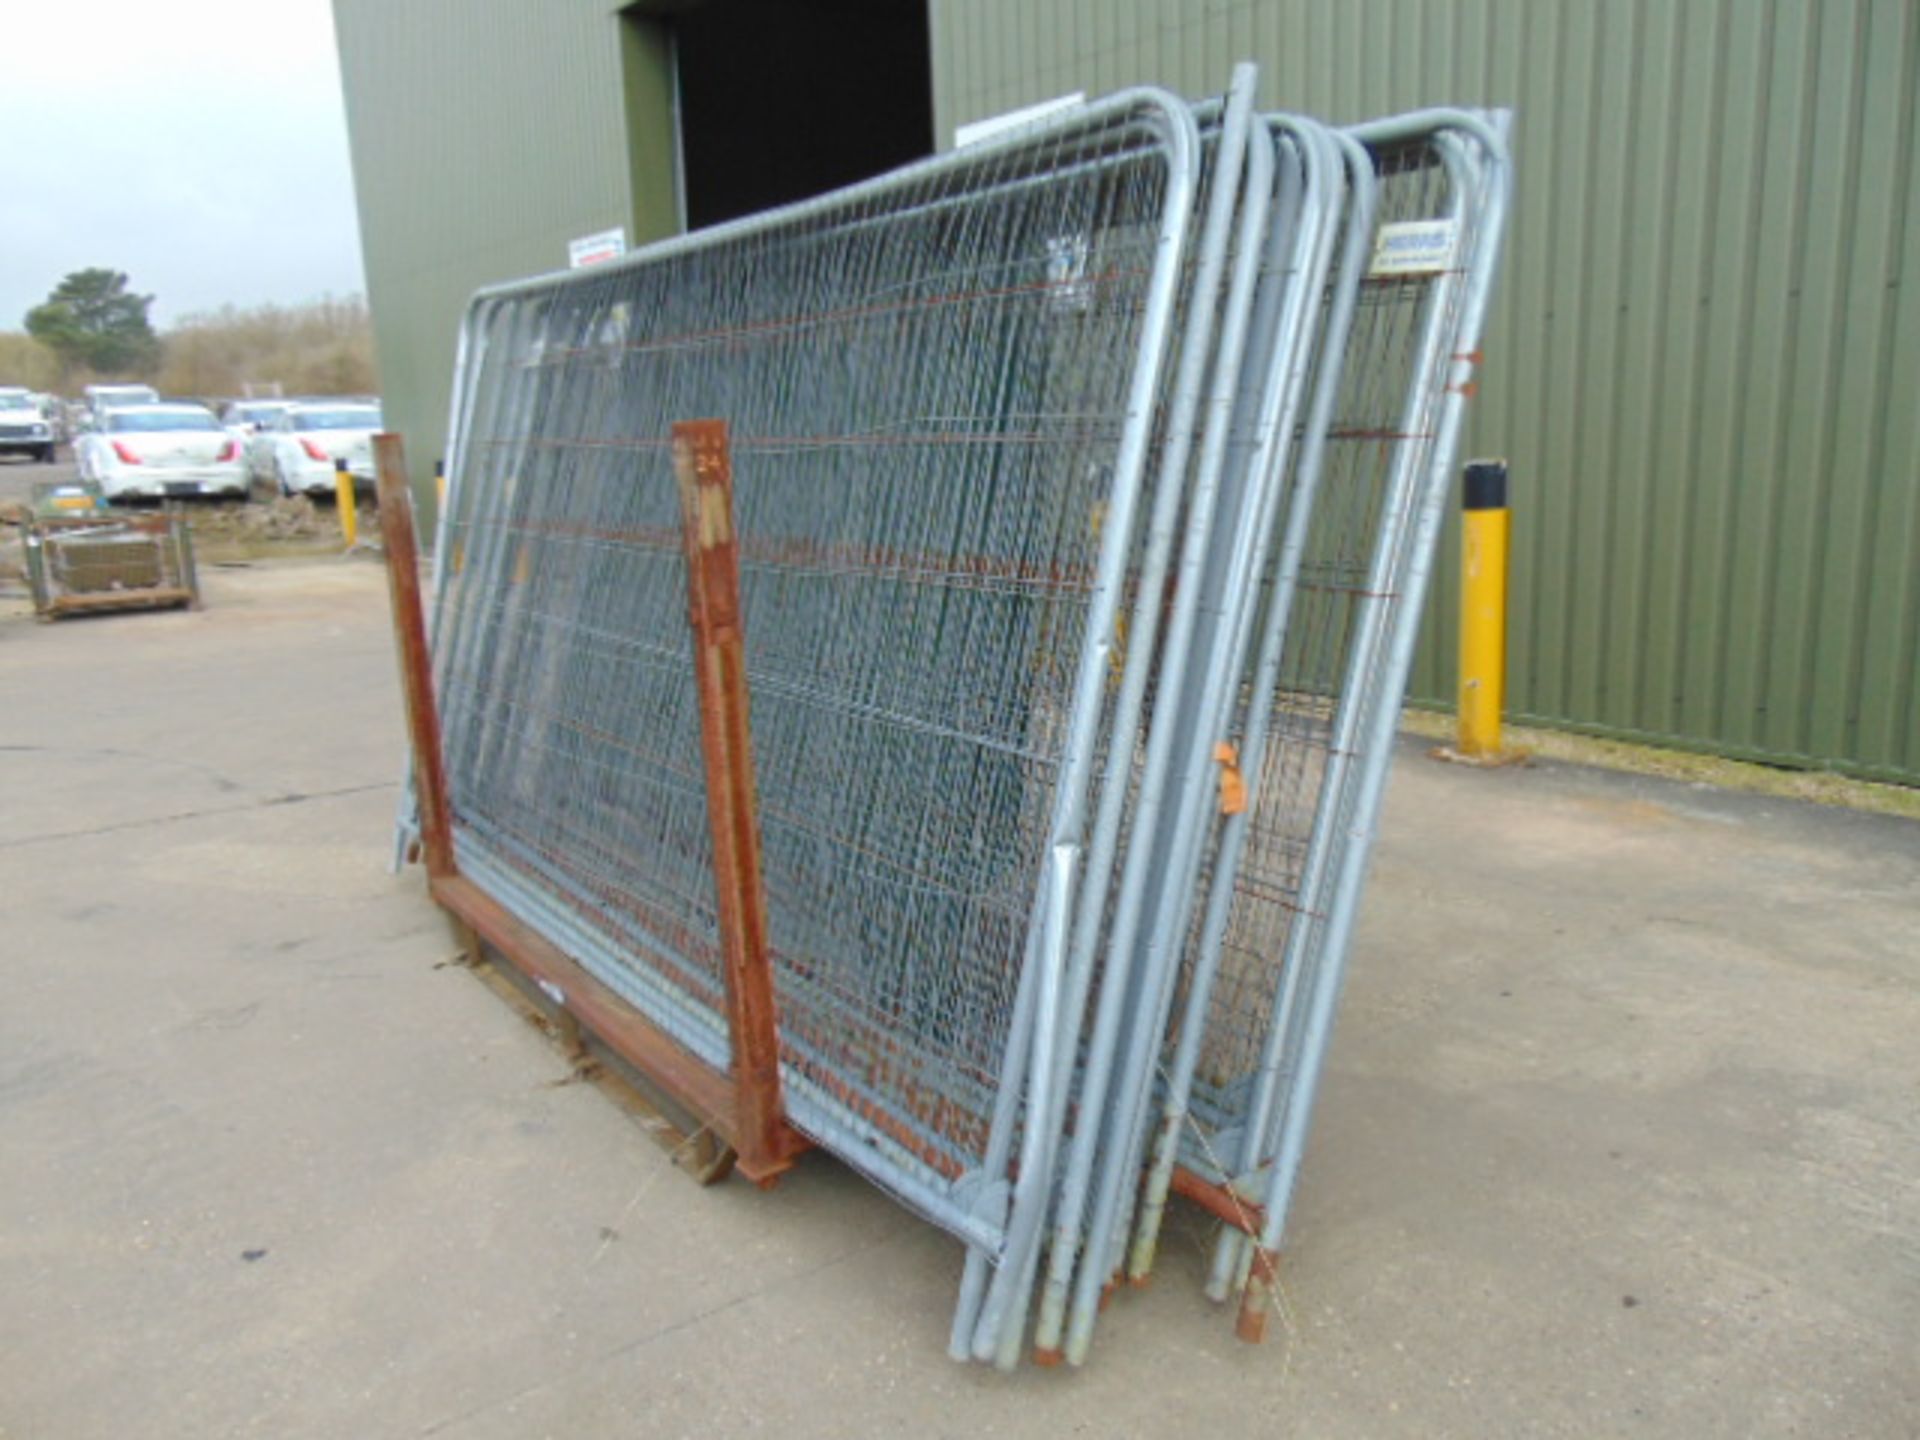 17 x Heras Style Fencing Panels 3.5m x 2m galvanized c/w with feet - Image 2 of 3